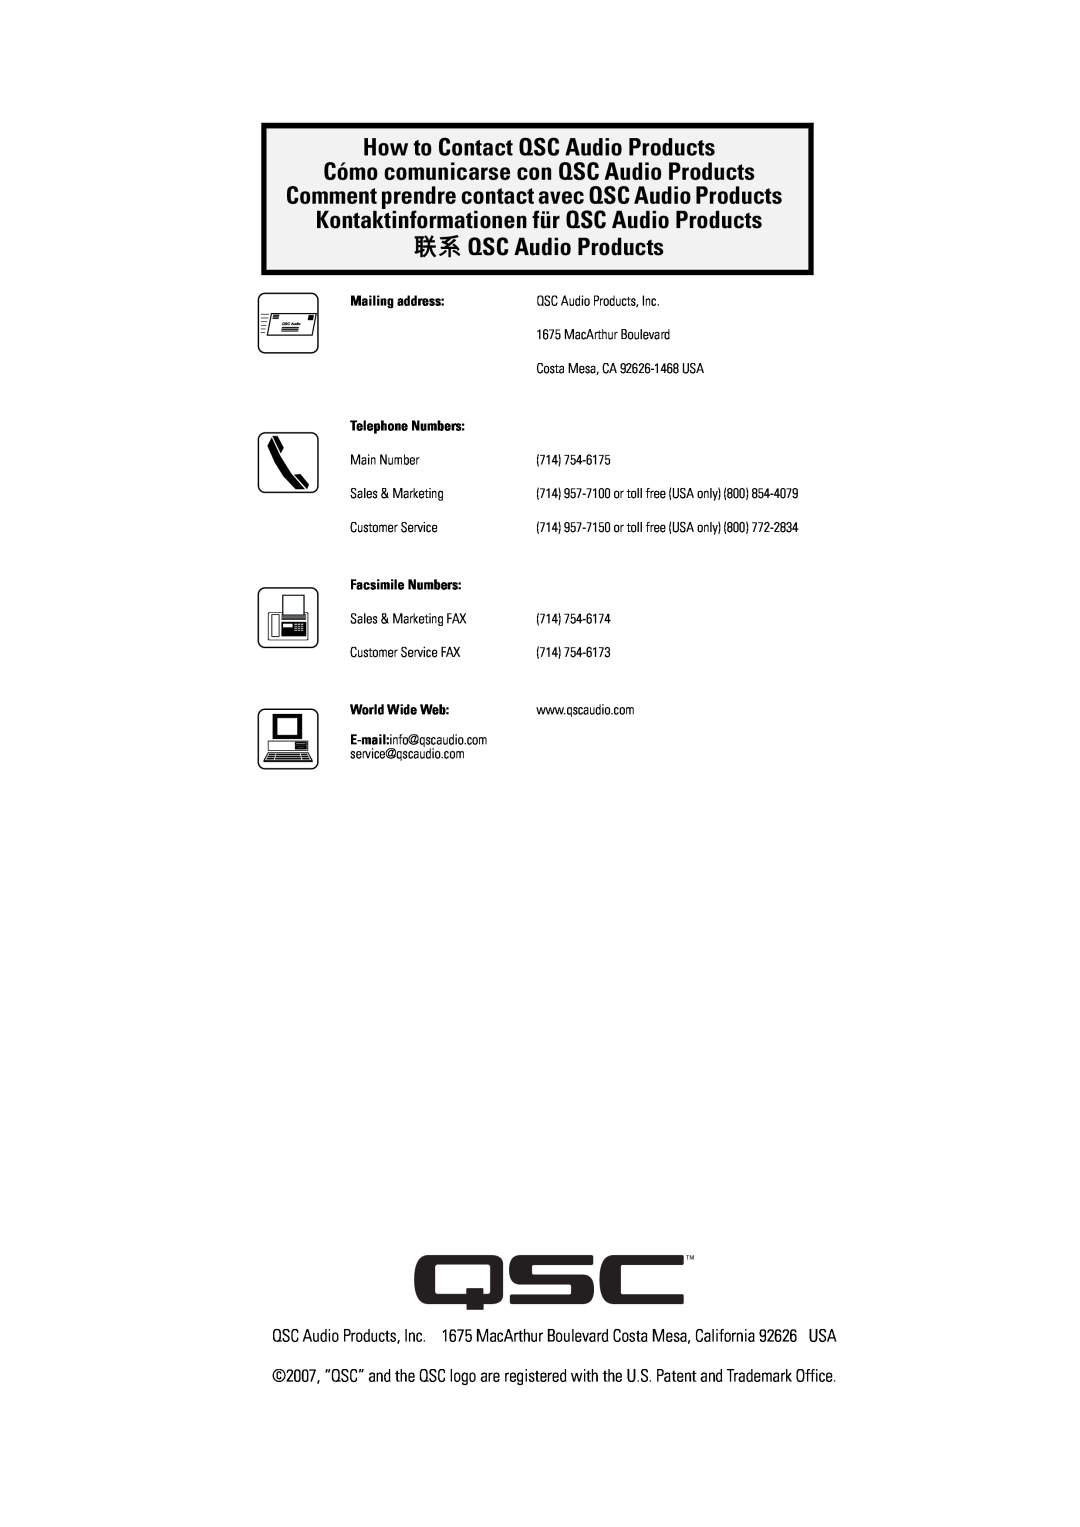 QSC Audio AD-C81Tw user manual How to Contact QSC Audio Products, 联系 QSC Audio Products, Mailing address, Telephone Numbers 